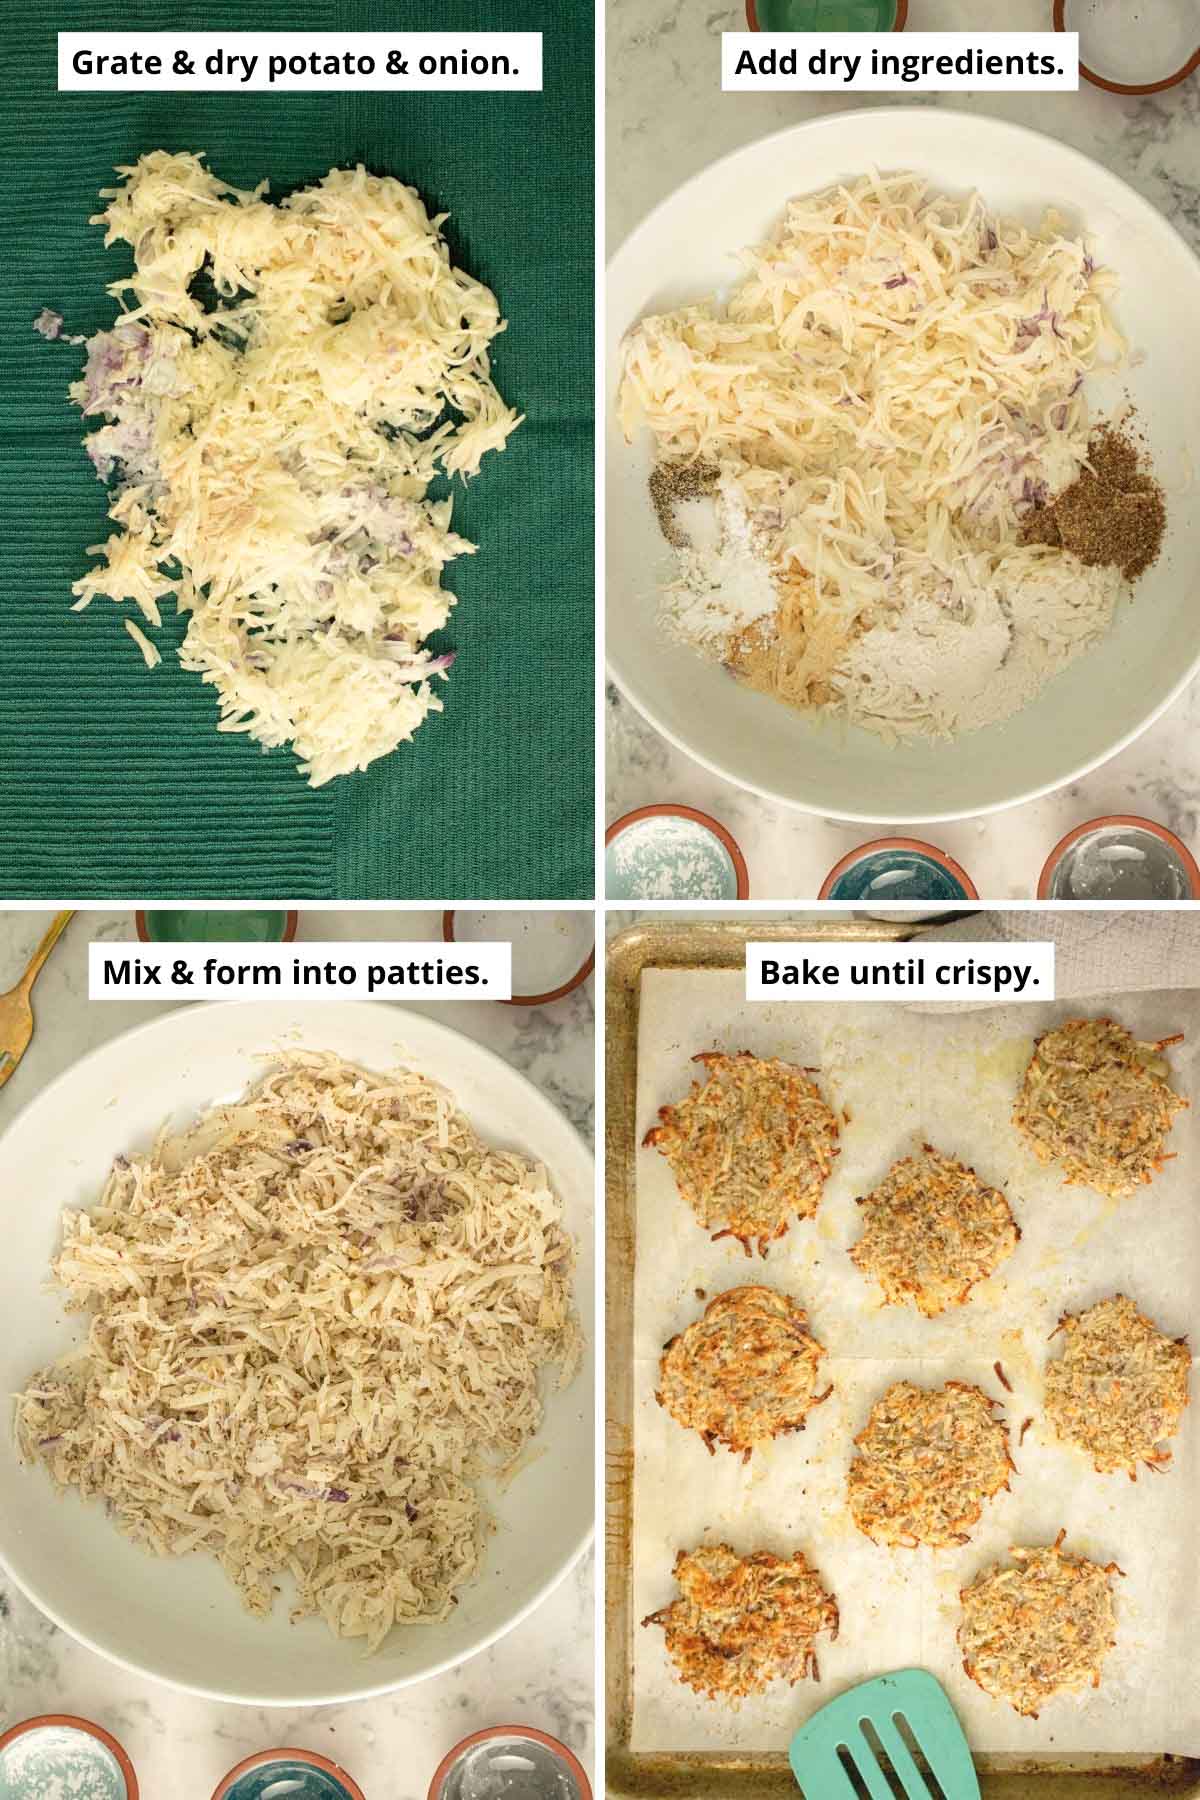 image collage showing the shredded potato on a kitchen towel before drying, in a bowl with dry ingredients before and after mixing, and the cooked latkes on a baking sheet